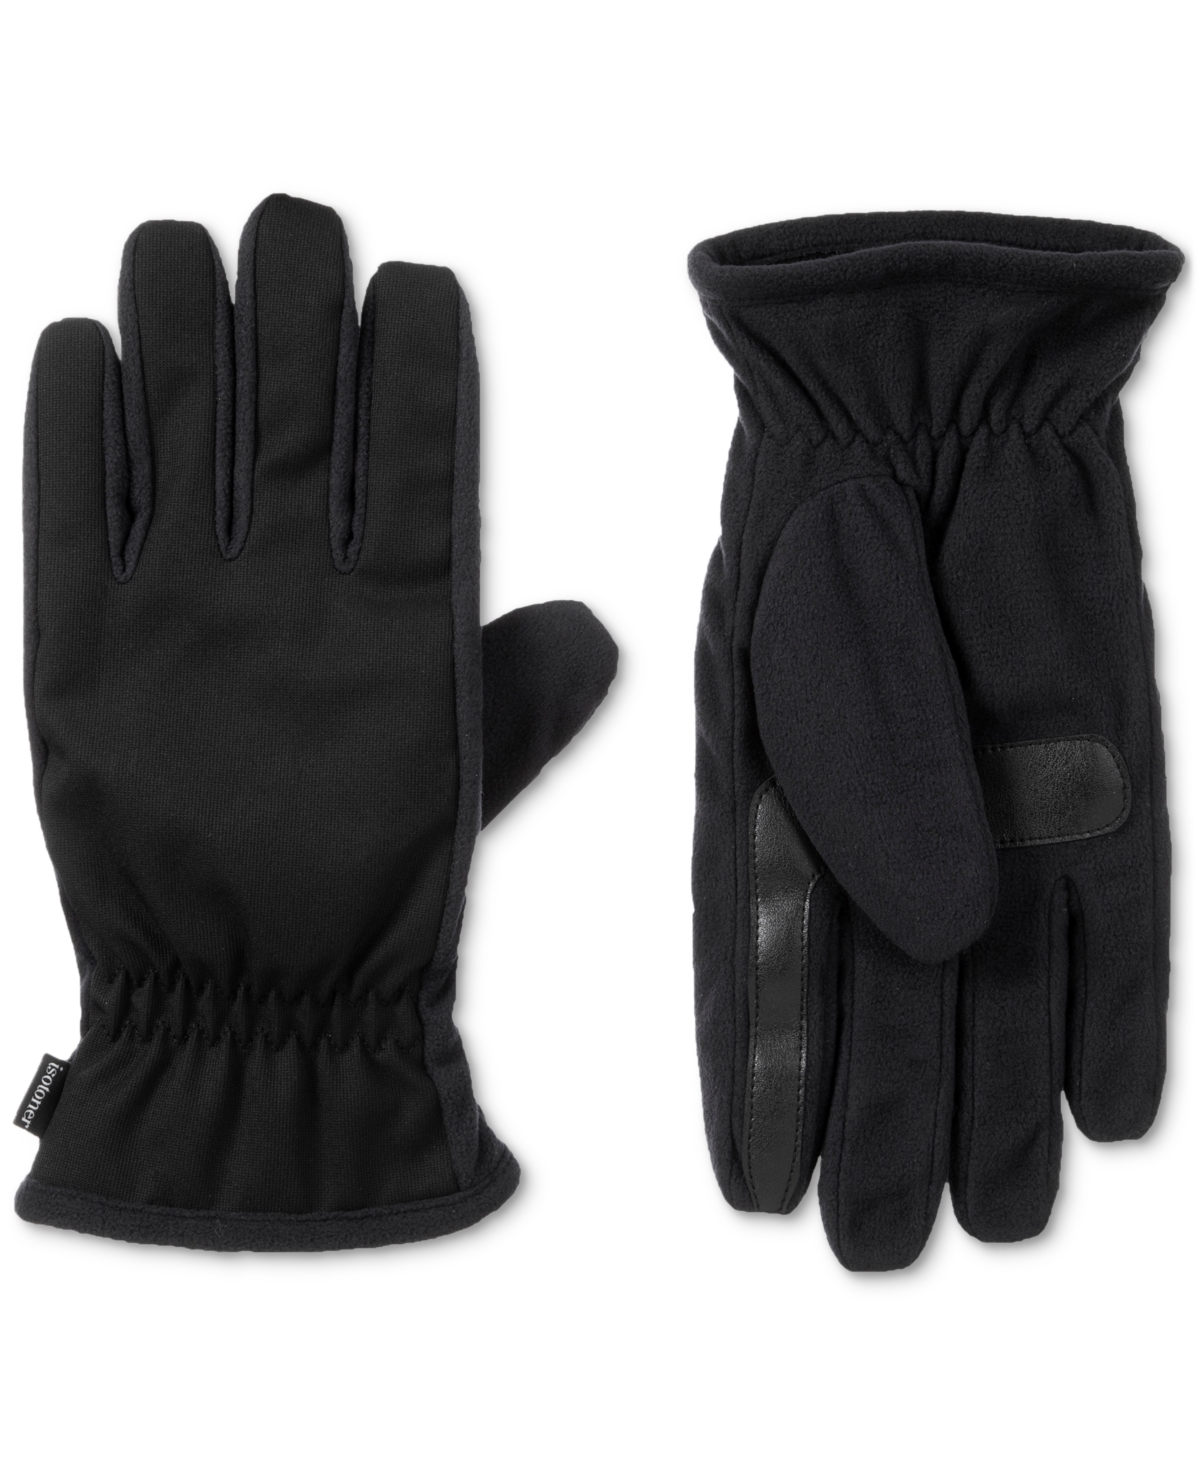 Men's Touchscreen Water Repellant Stretch Gloves - Black